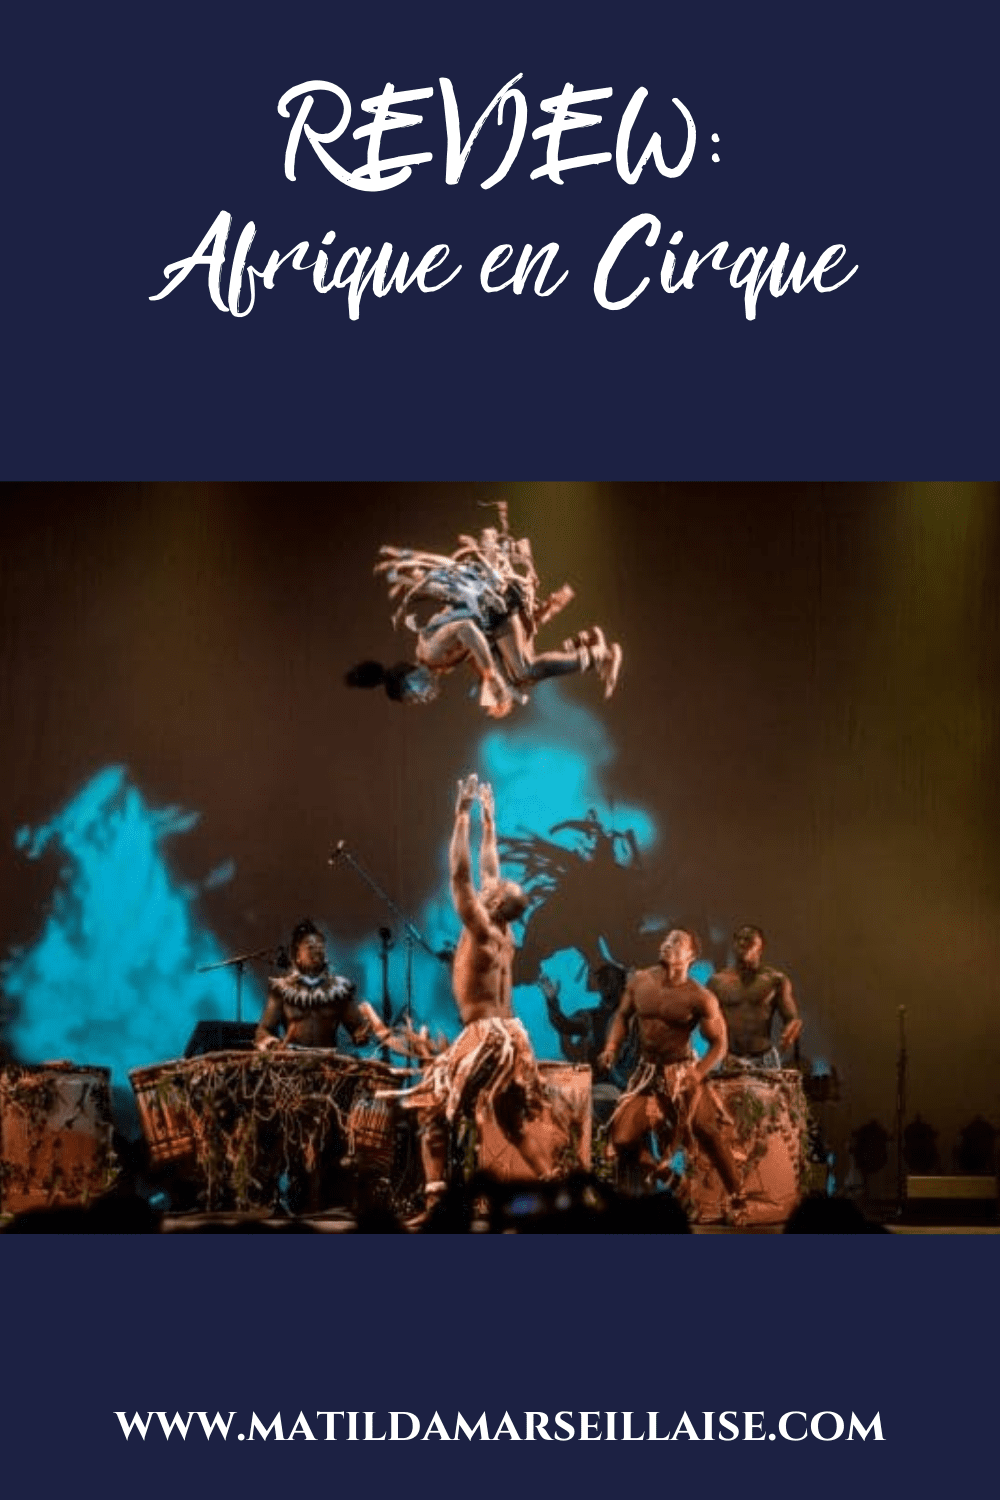 Afrique en Cirque is transportive circus, music and dance at Adelaide Fringe